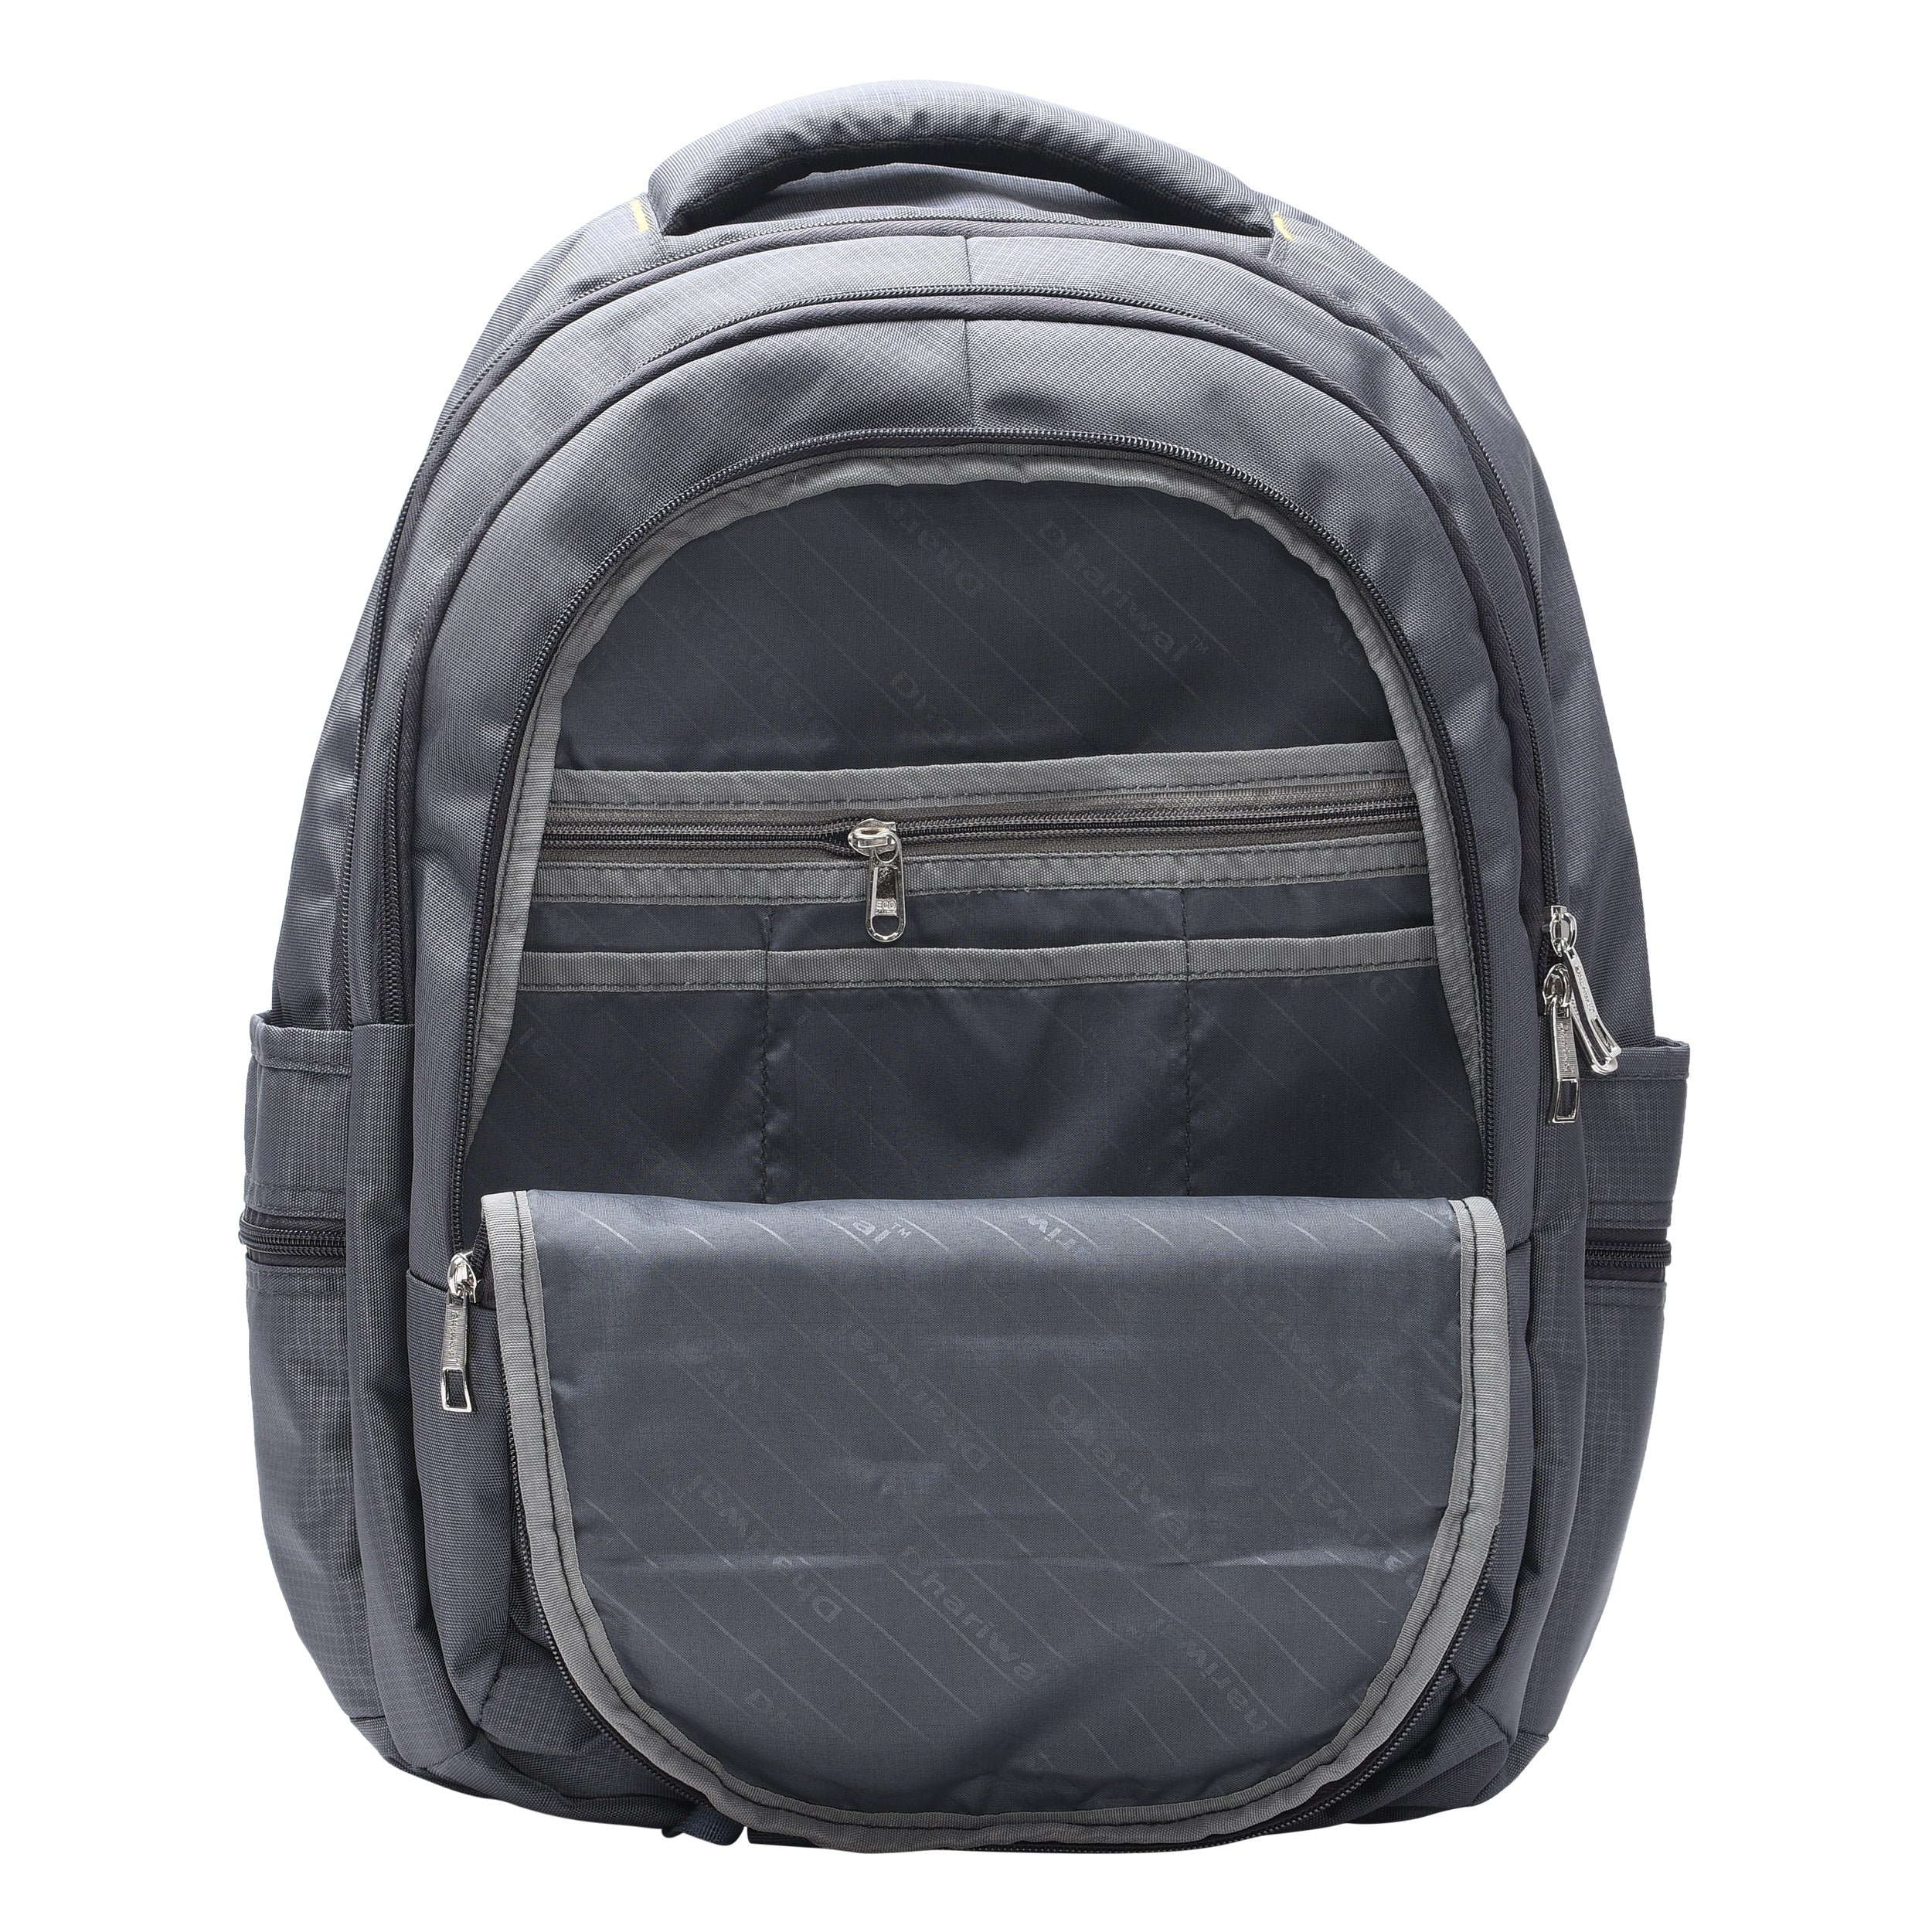 Best Lunch Box Backpack For Adults - 11 Lunch Box Backpack Options |  Backpackies